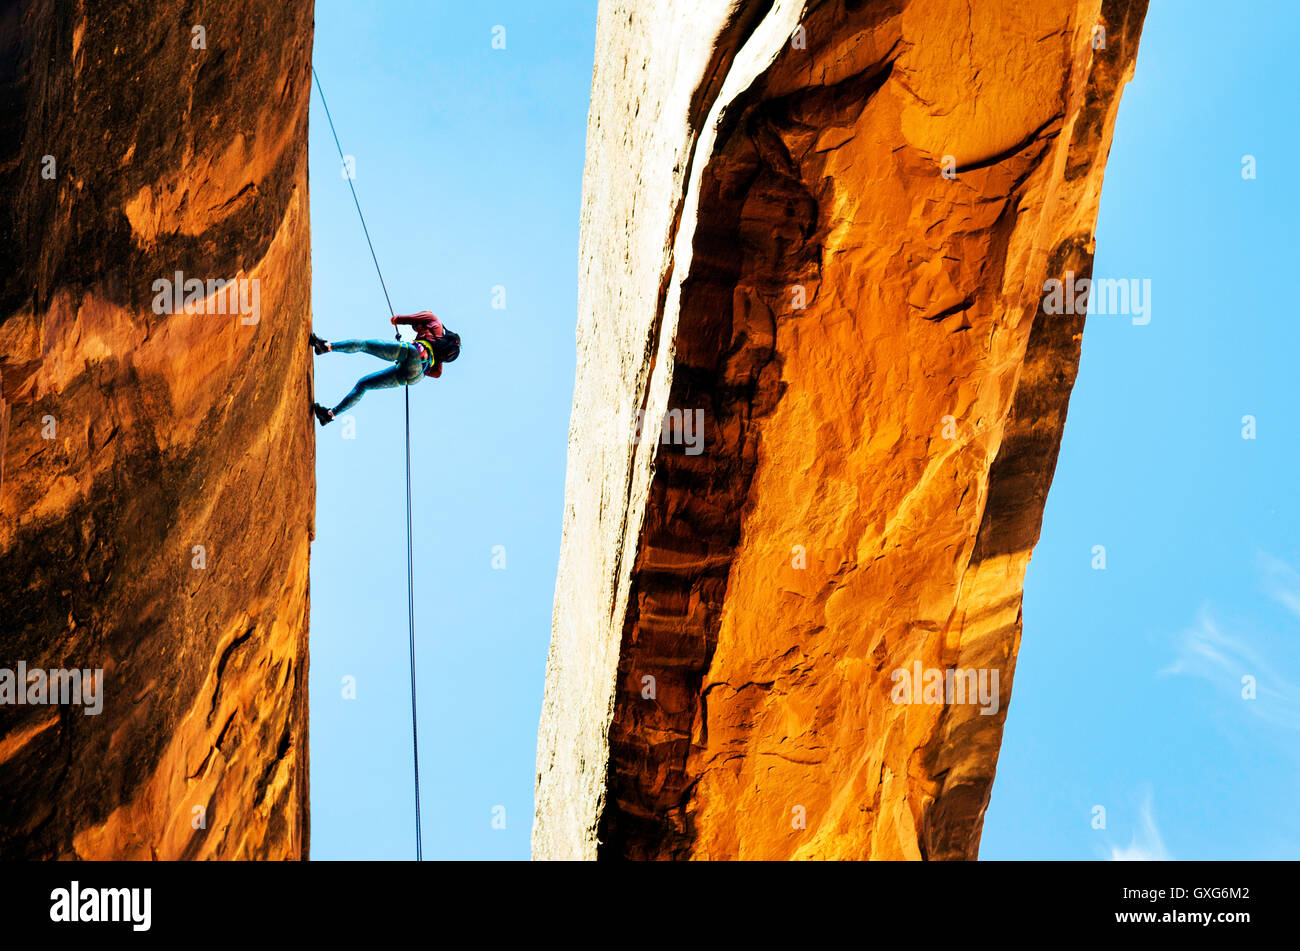 Rock climber using rope on arch Stock Photo